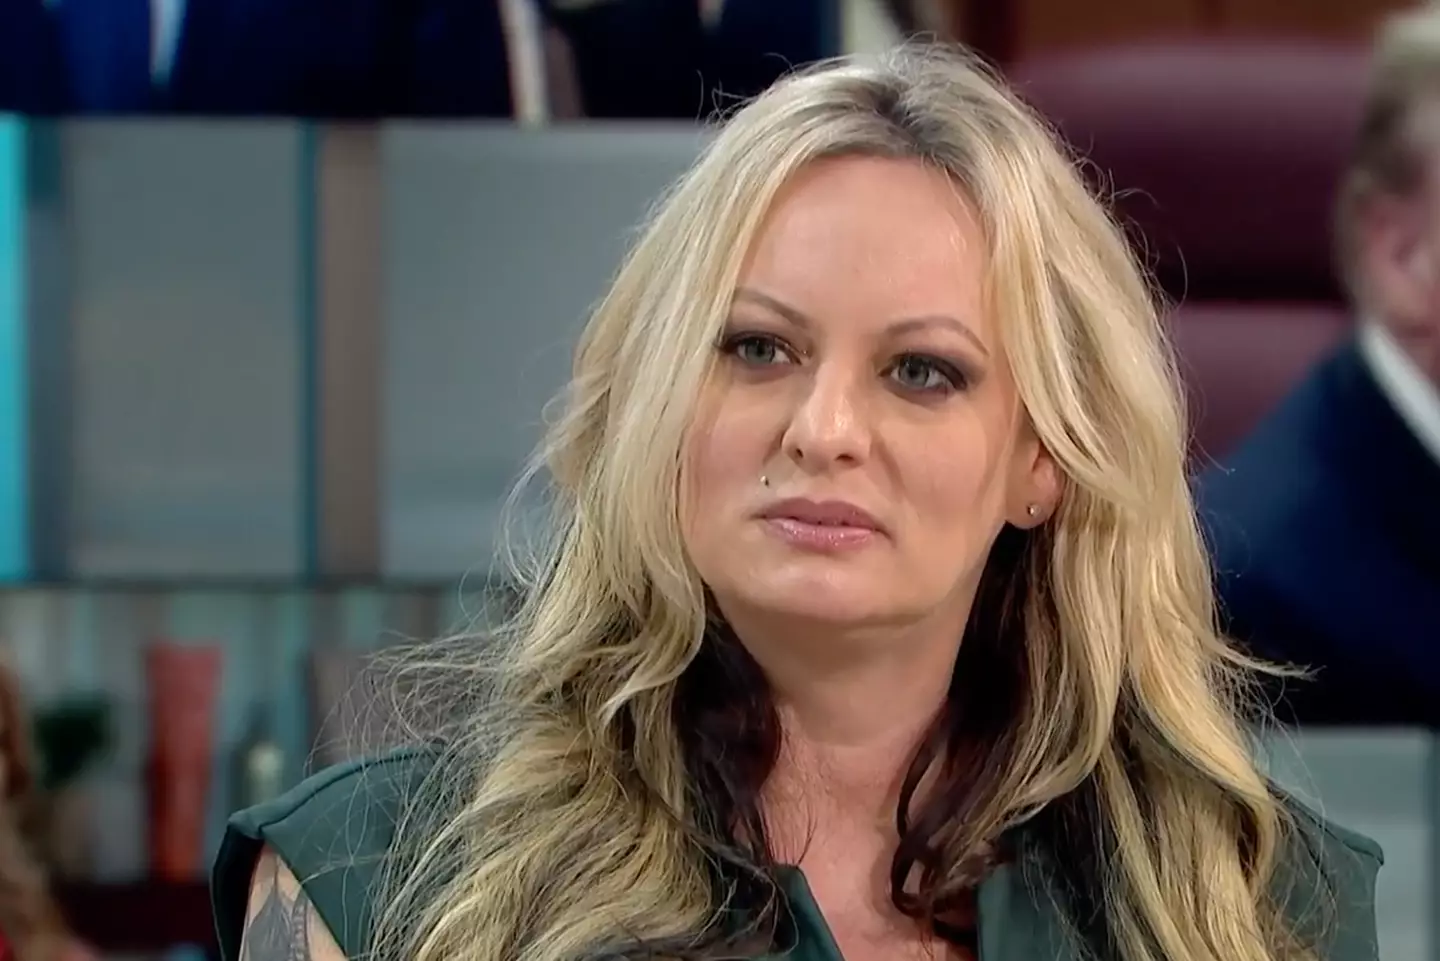 Stormy Daniels on Good Morning Britain.